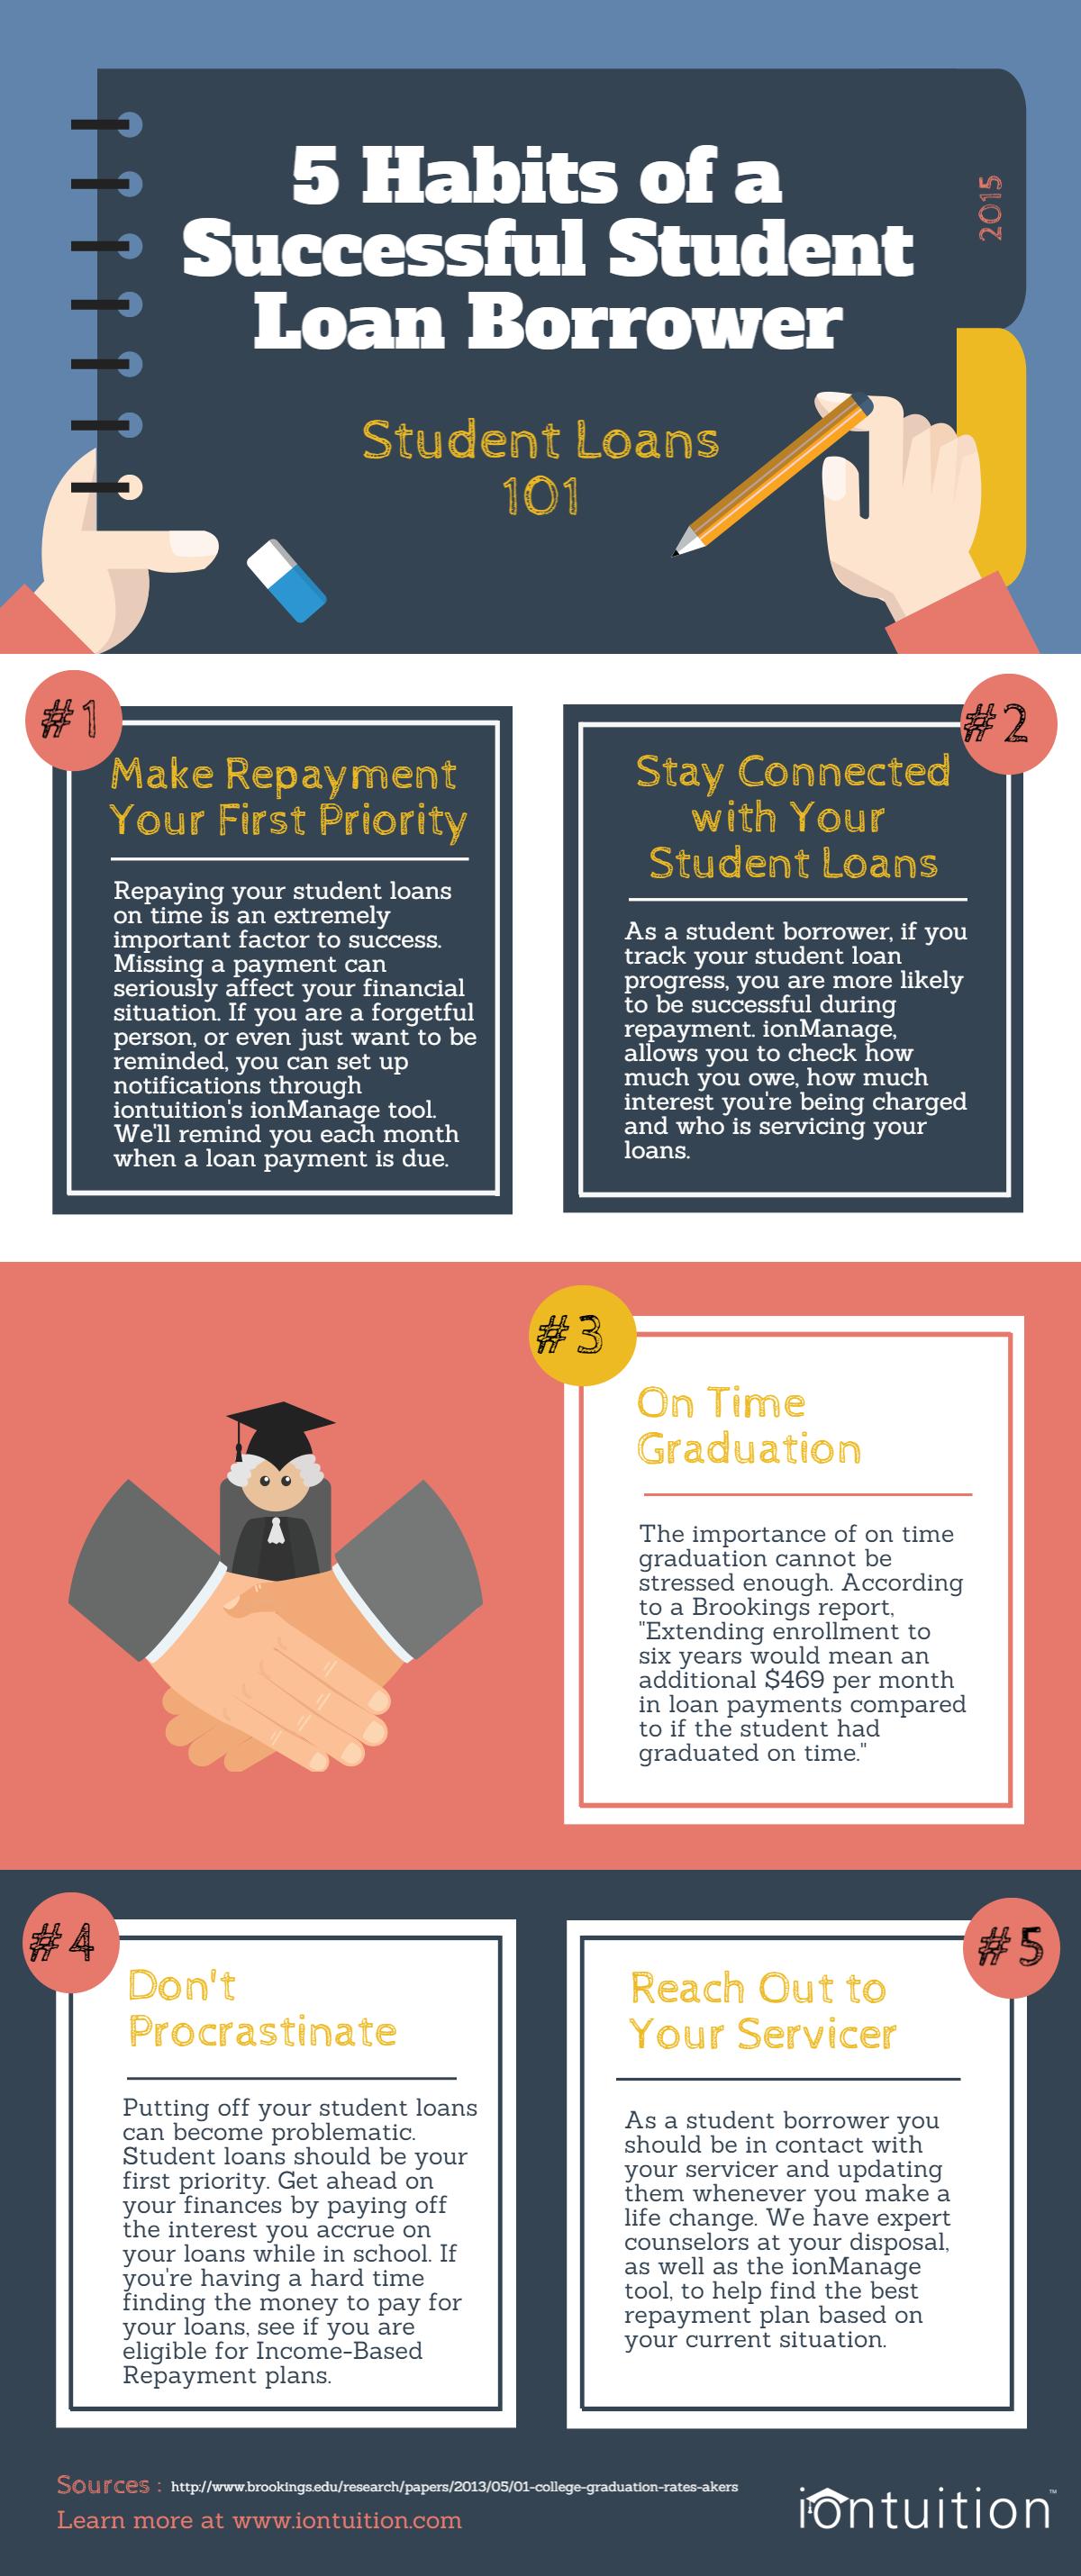 5 habits of a successful student loan borrower - infographic